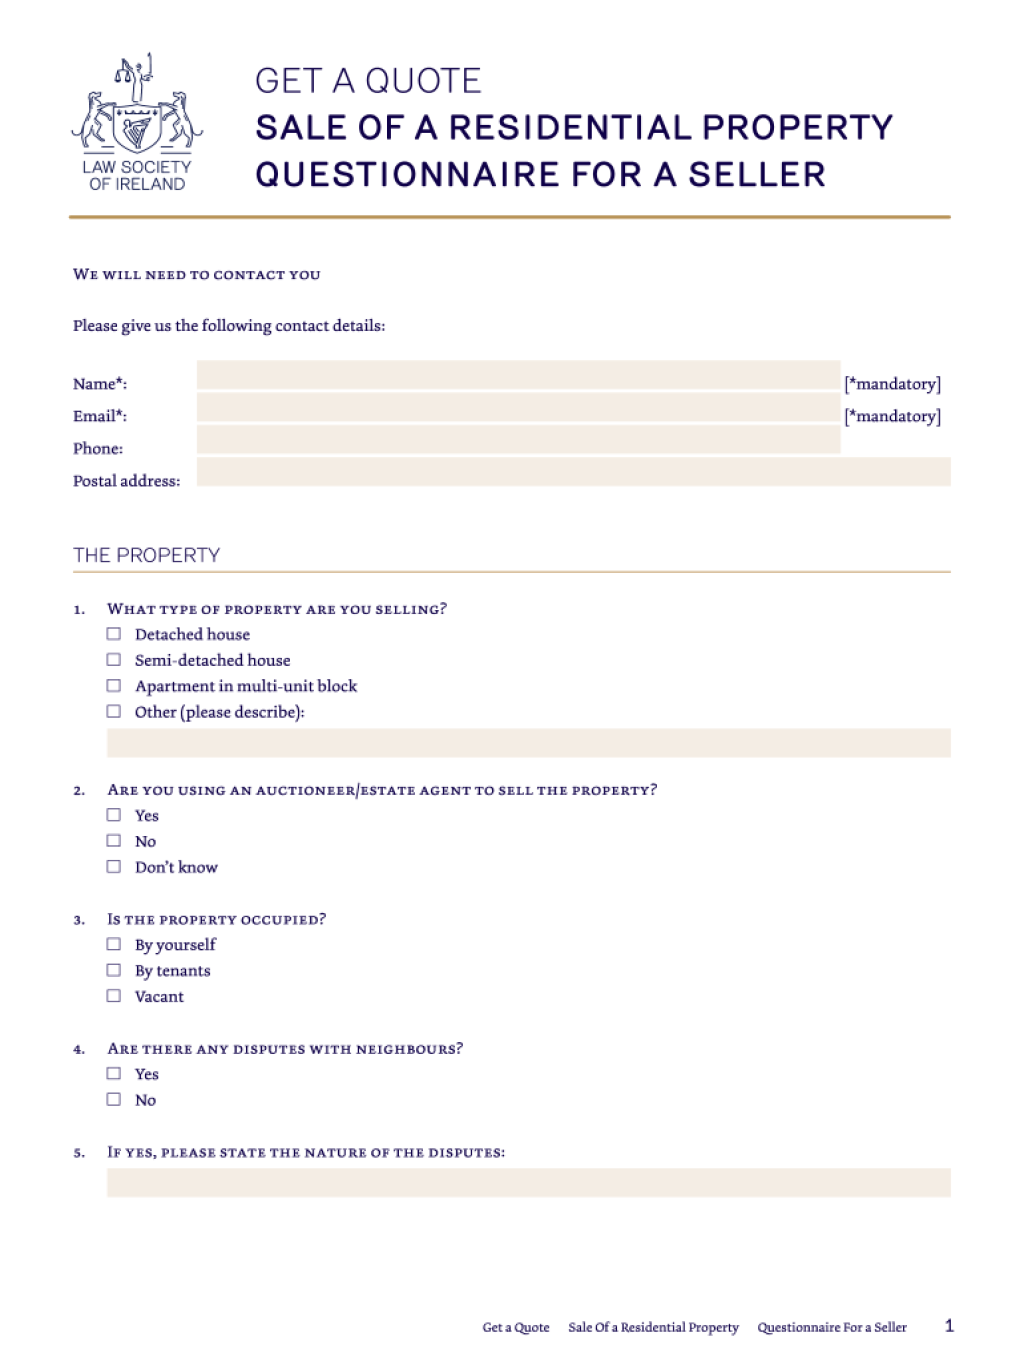 Picture of: Sale property questionnaire law society: Fill out & sign online